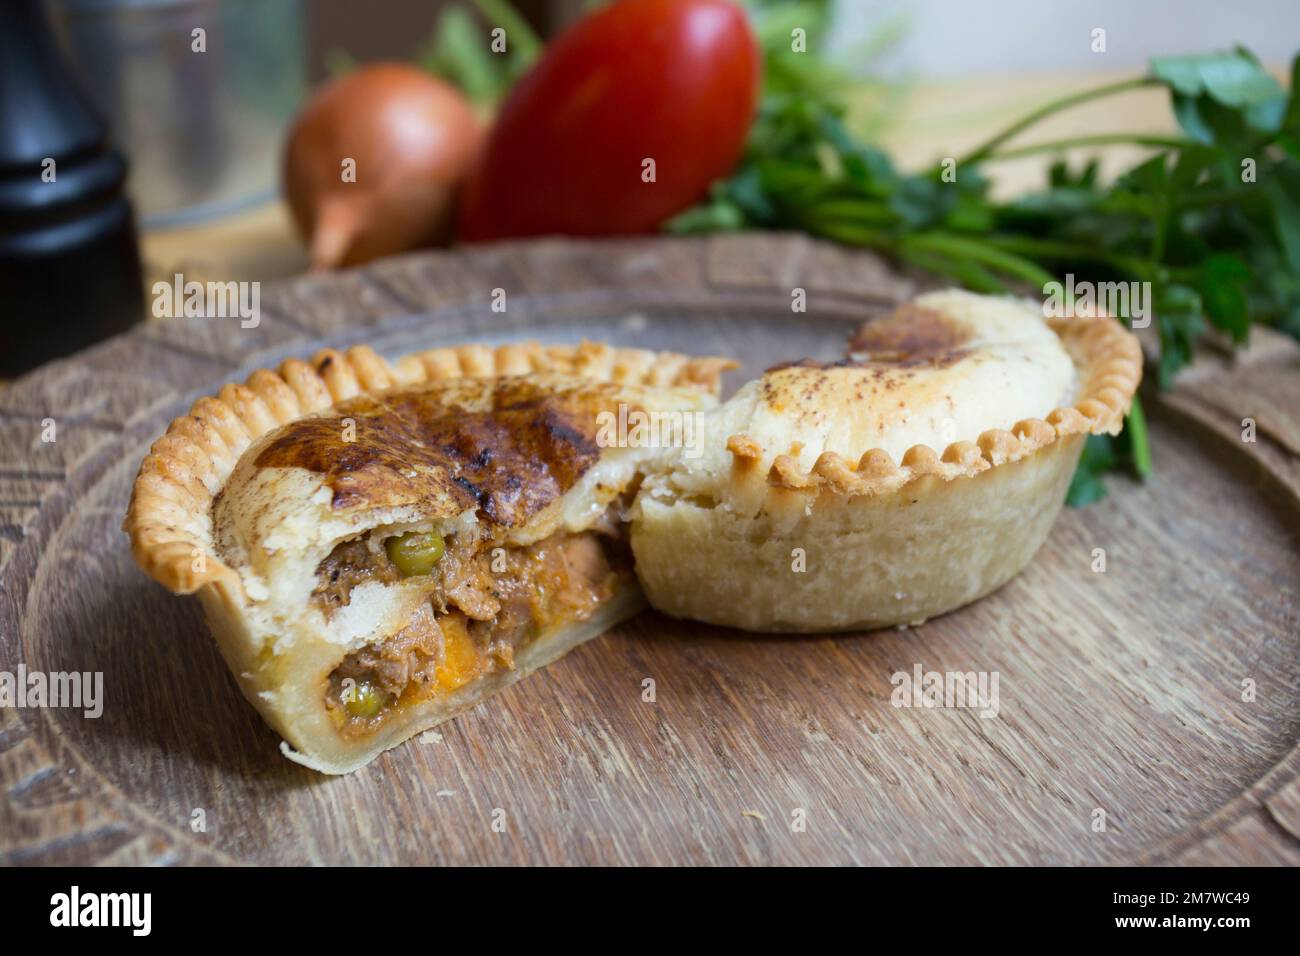 British ale steak Pie. Tender pieces of steak are cooked with vegetables and English ale, then wrapped in a flaky buttery crust. Stock Photo